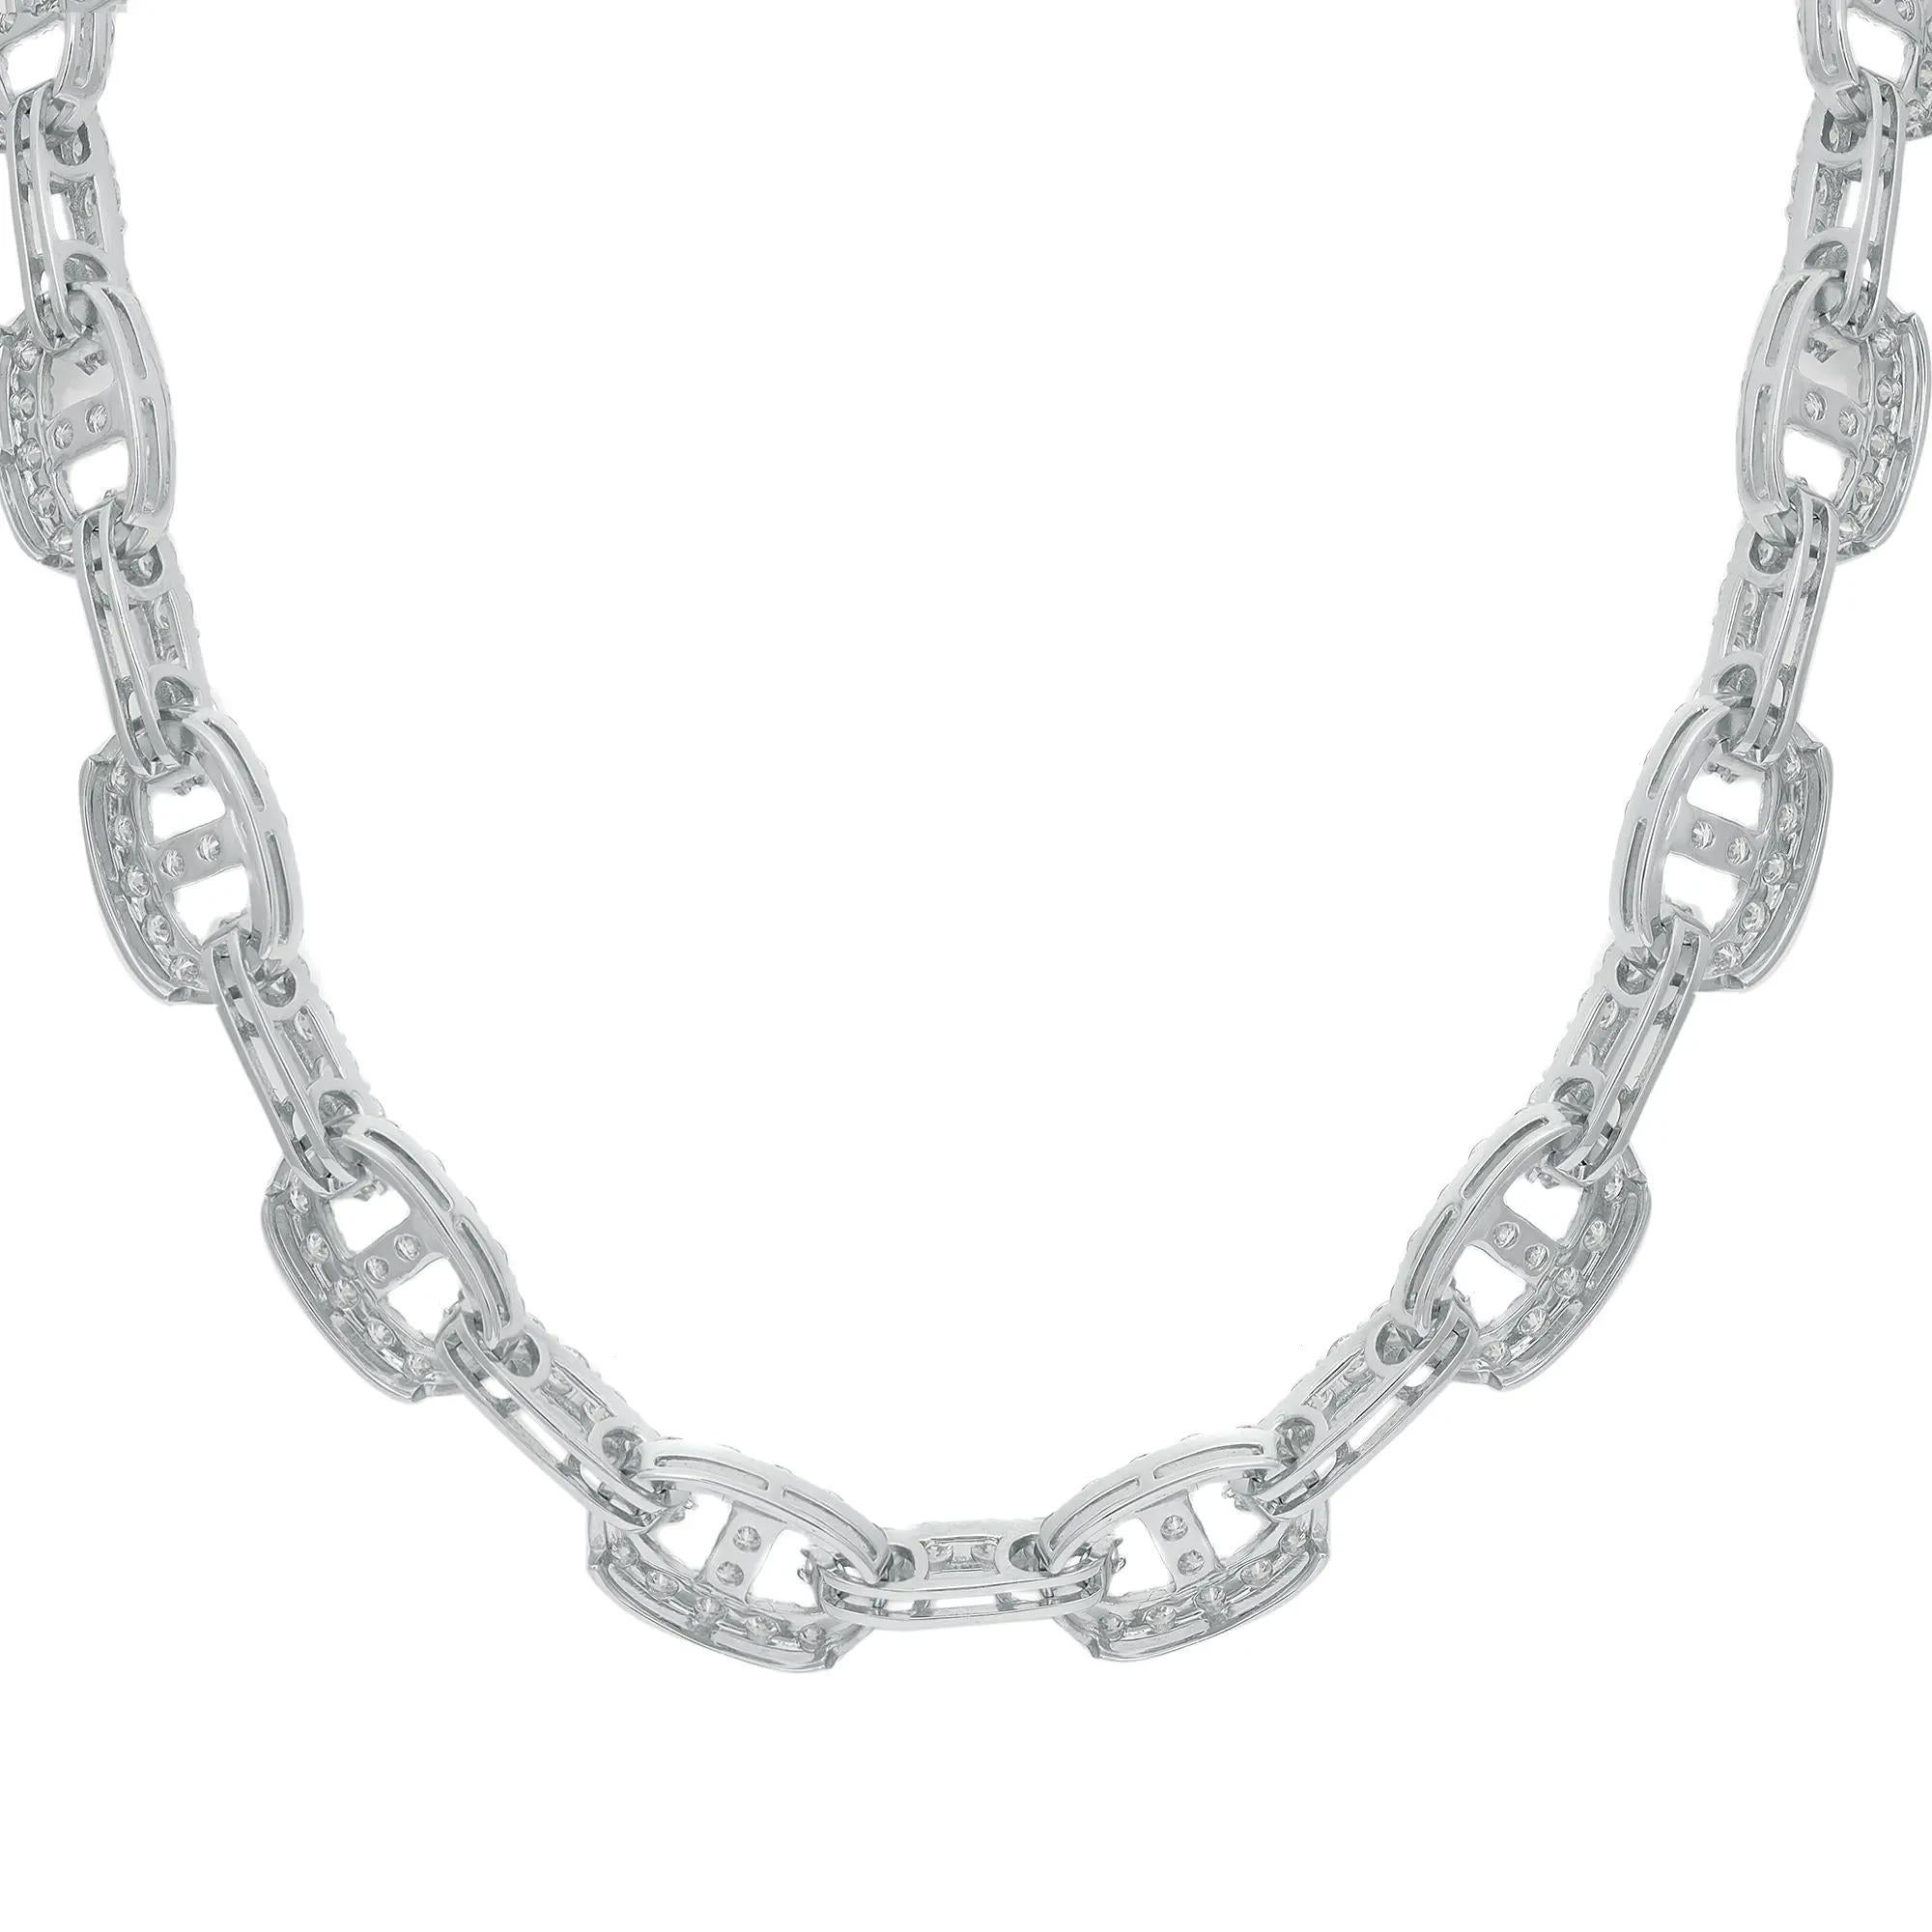 Indulge in the epitome of luxury with the Elizabeth Fine Jewelry 14.96 Carat Diamond Mariner Link Chain Necklace in 18K White Gold. This exquisite piece seamlessly blends classic elegance with contemporary allure. Crafted with precision in 18K white